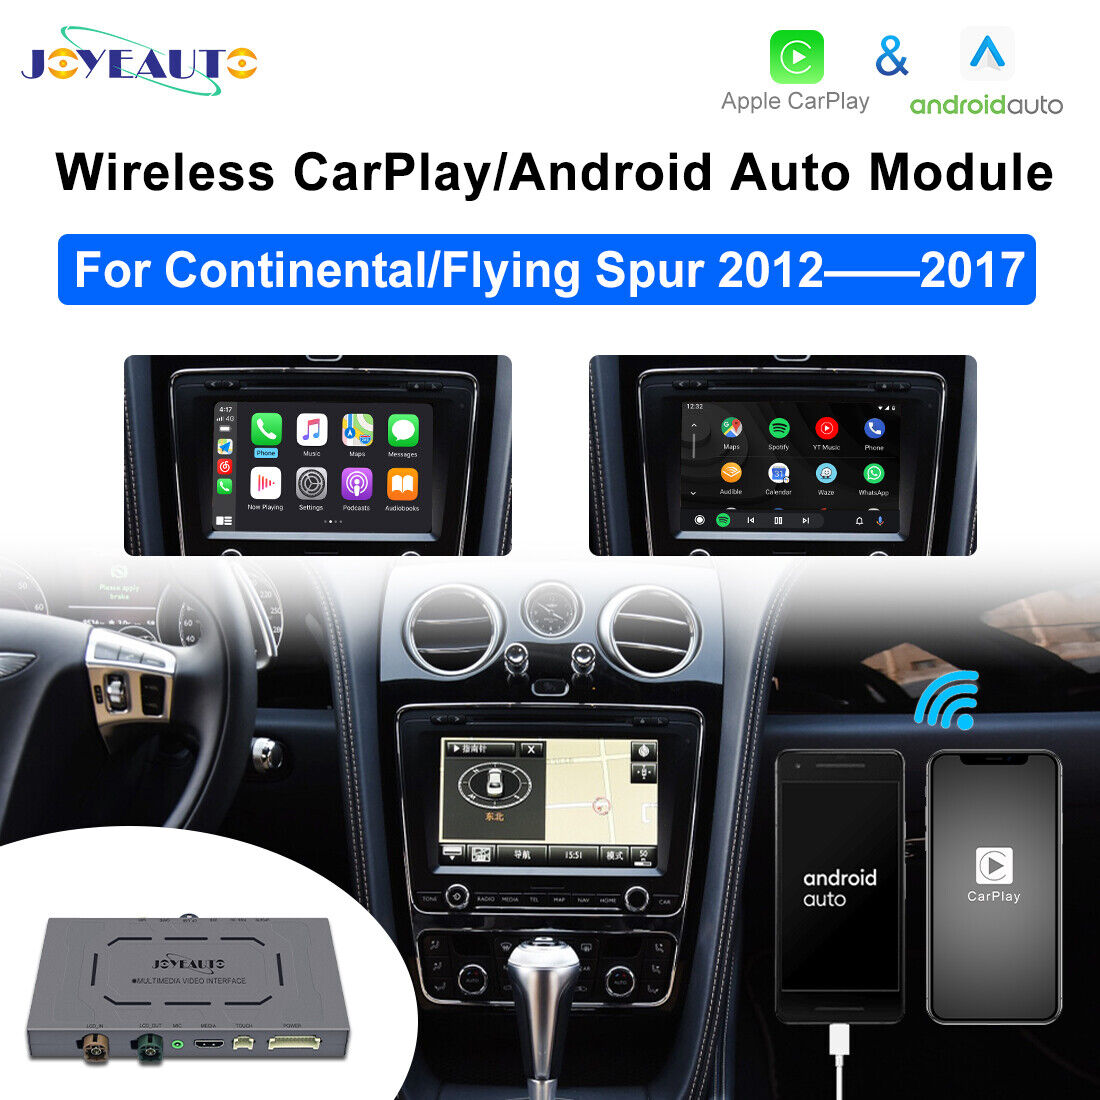 Carplay Android Auto Retrofit Kit for Bentley Continental/ Flying Spur 2012-2017